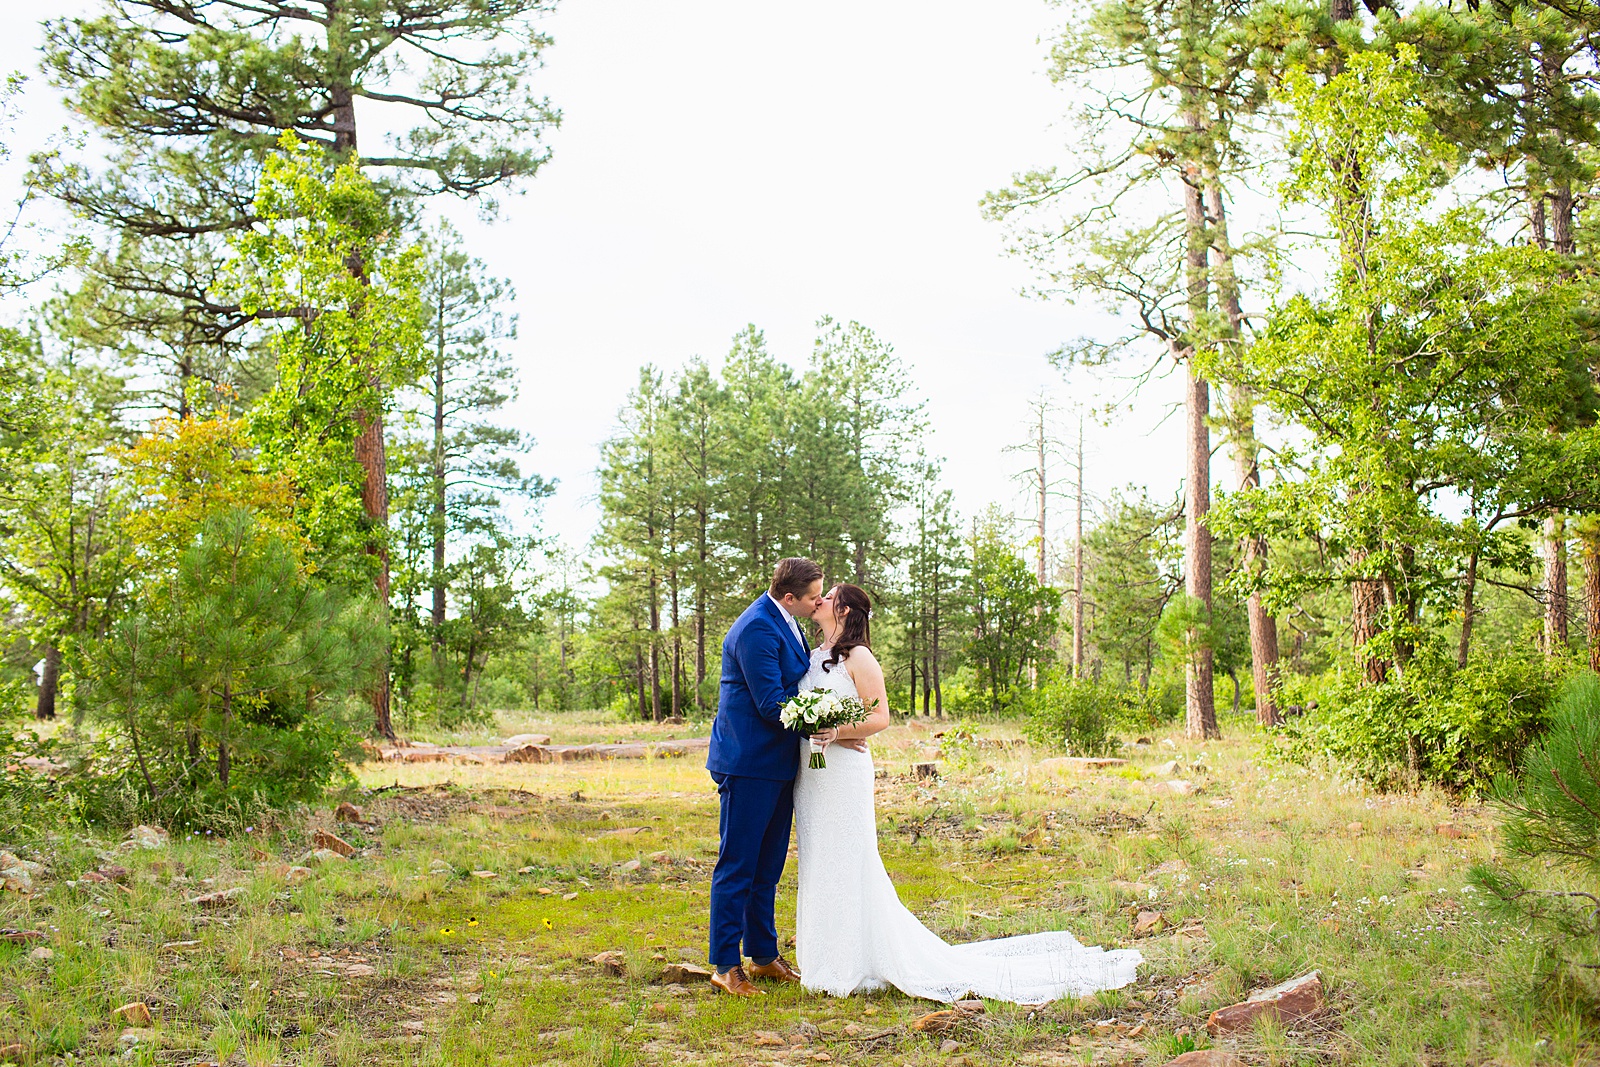 Bride & Groom's first look at Mogollon Rim by Arizona elopement photographer Juniper and Co Photography.